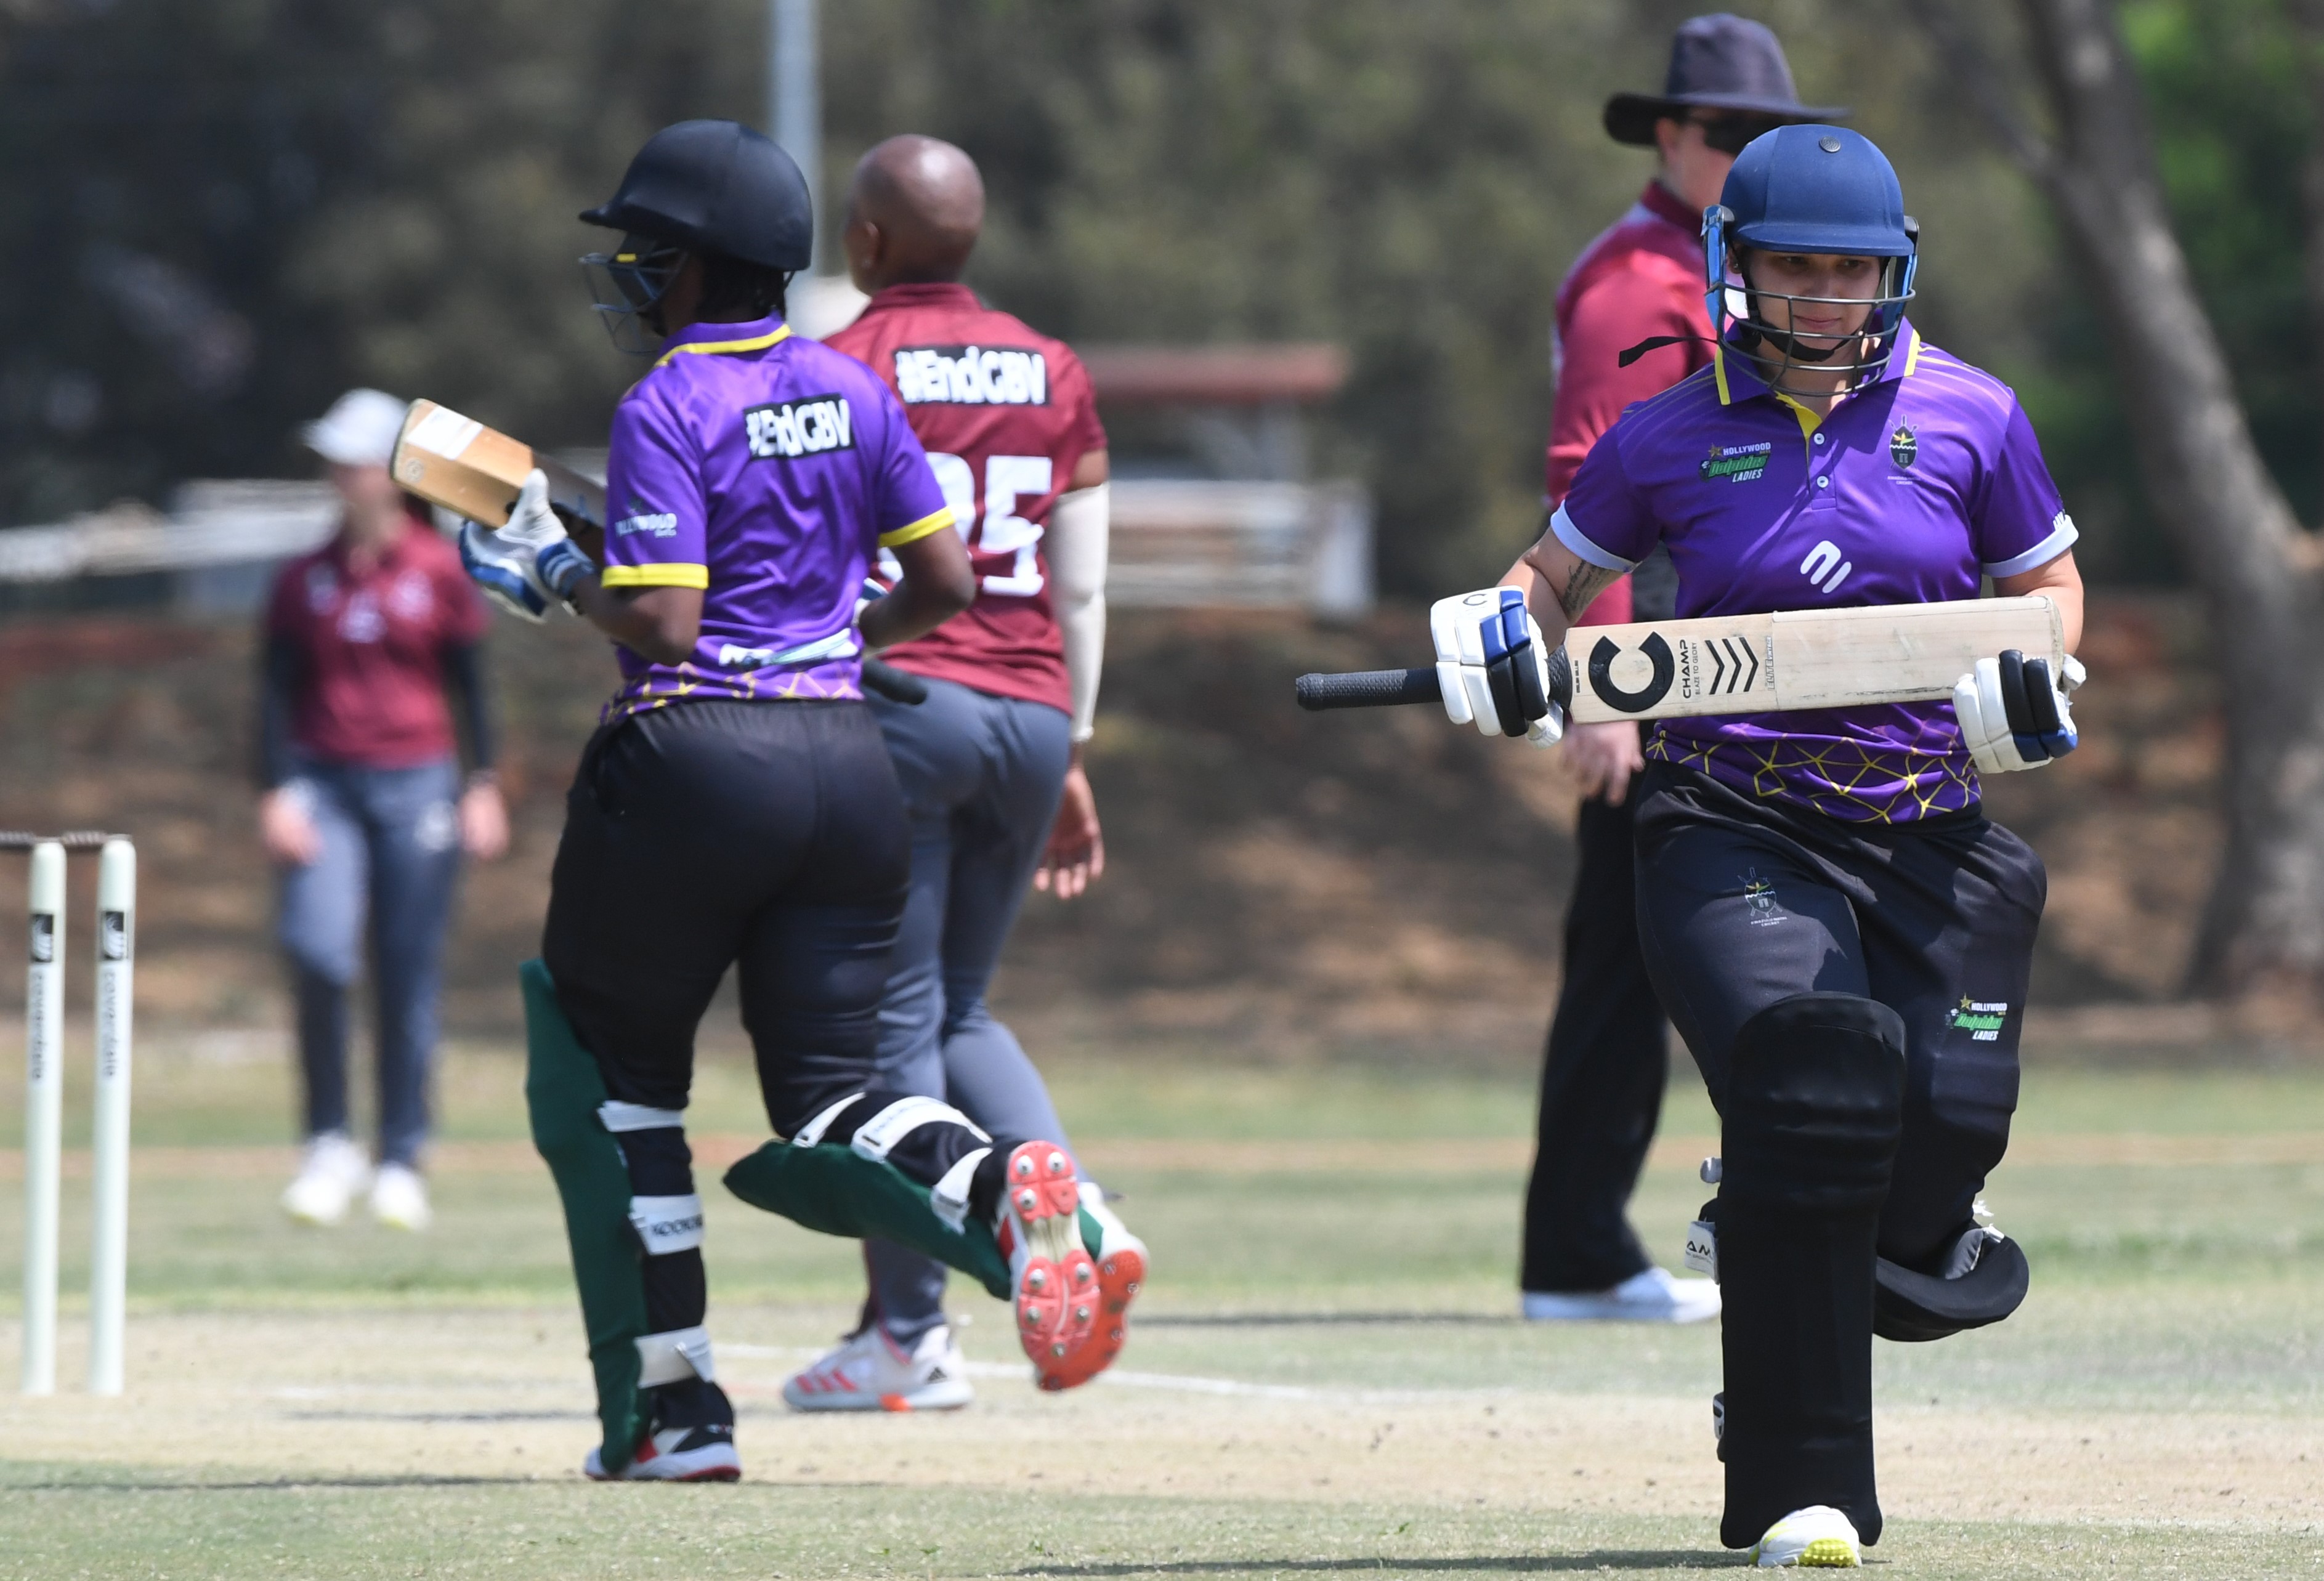 CSA Women’s Provincial Division One action returns after national break